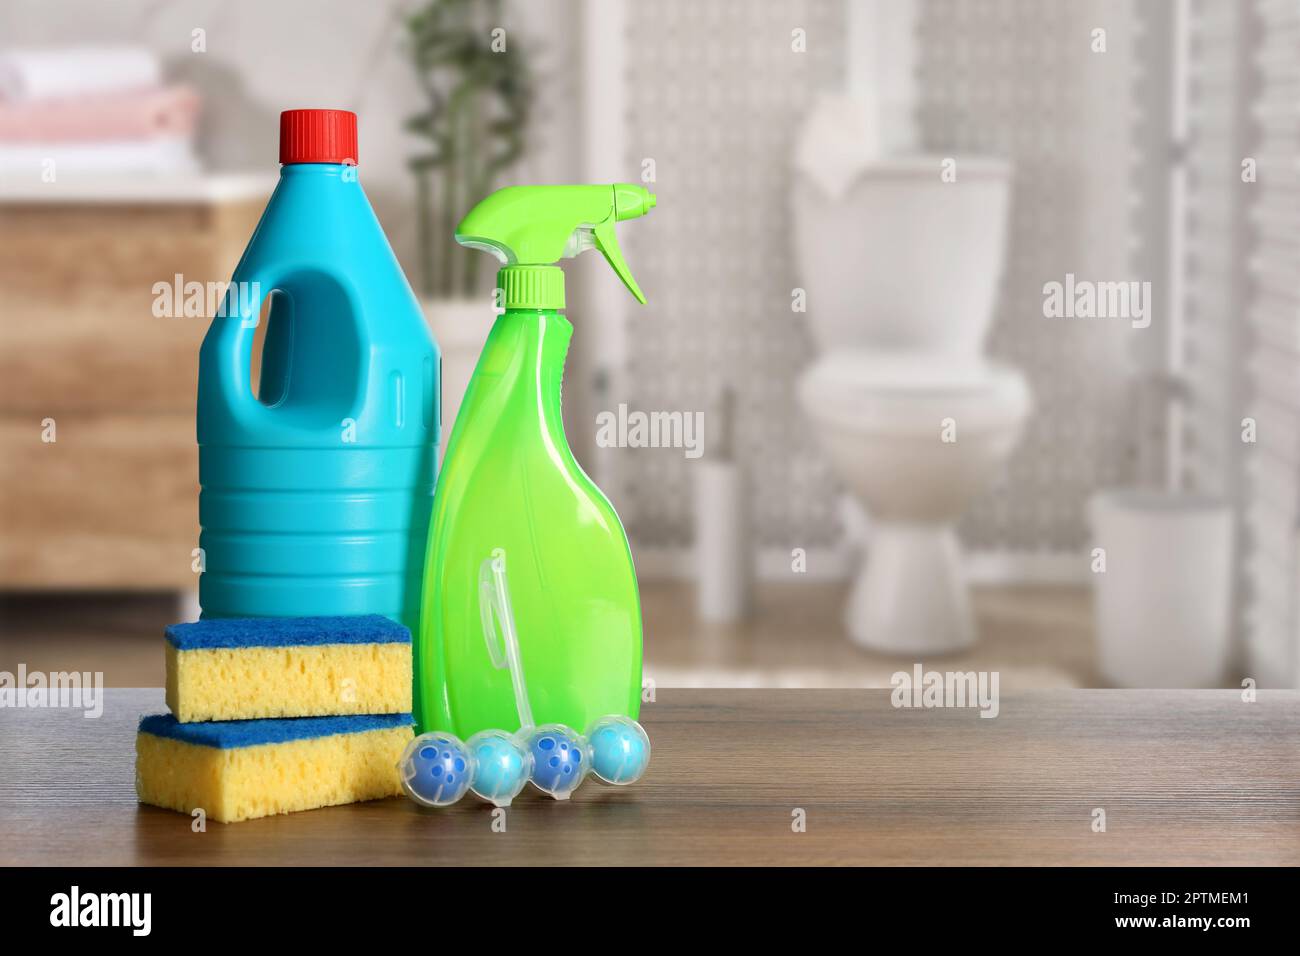 Different toilet cleaning supplies on wooden table in bathroom